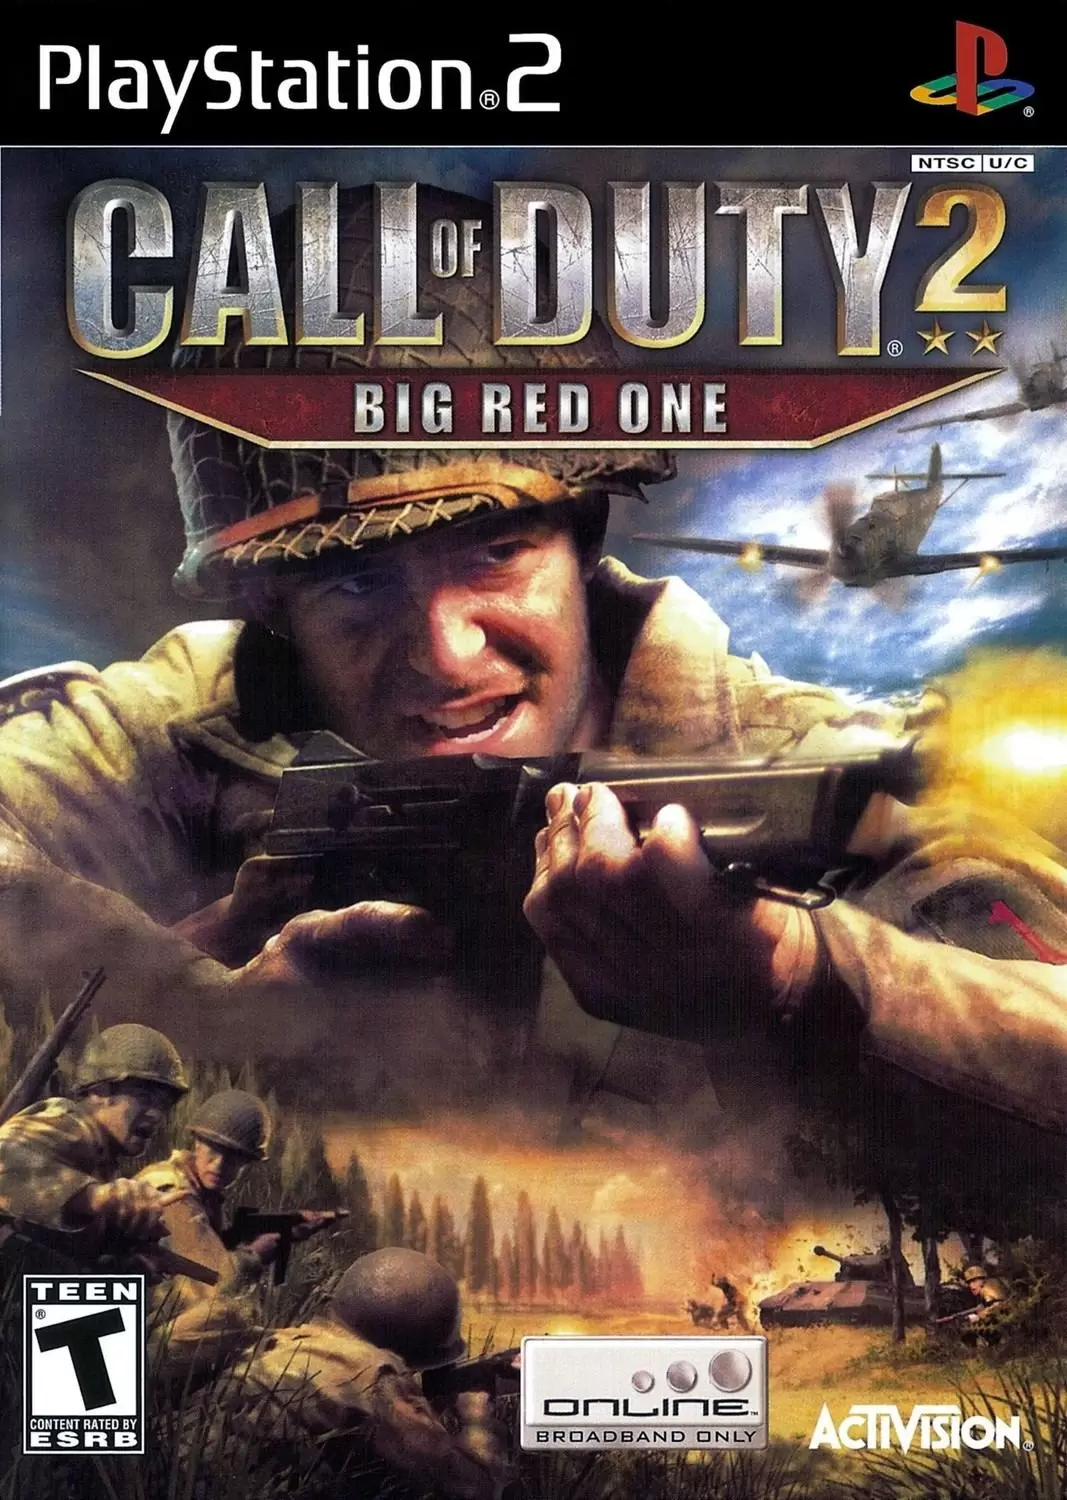 PS2 Games - Call of Duty 2: Big Red One